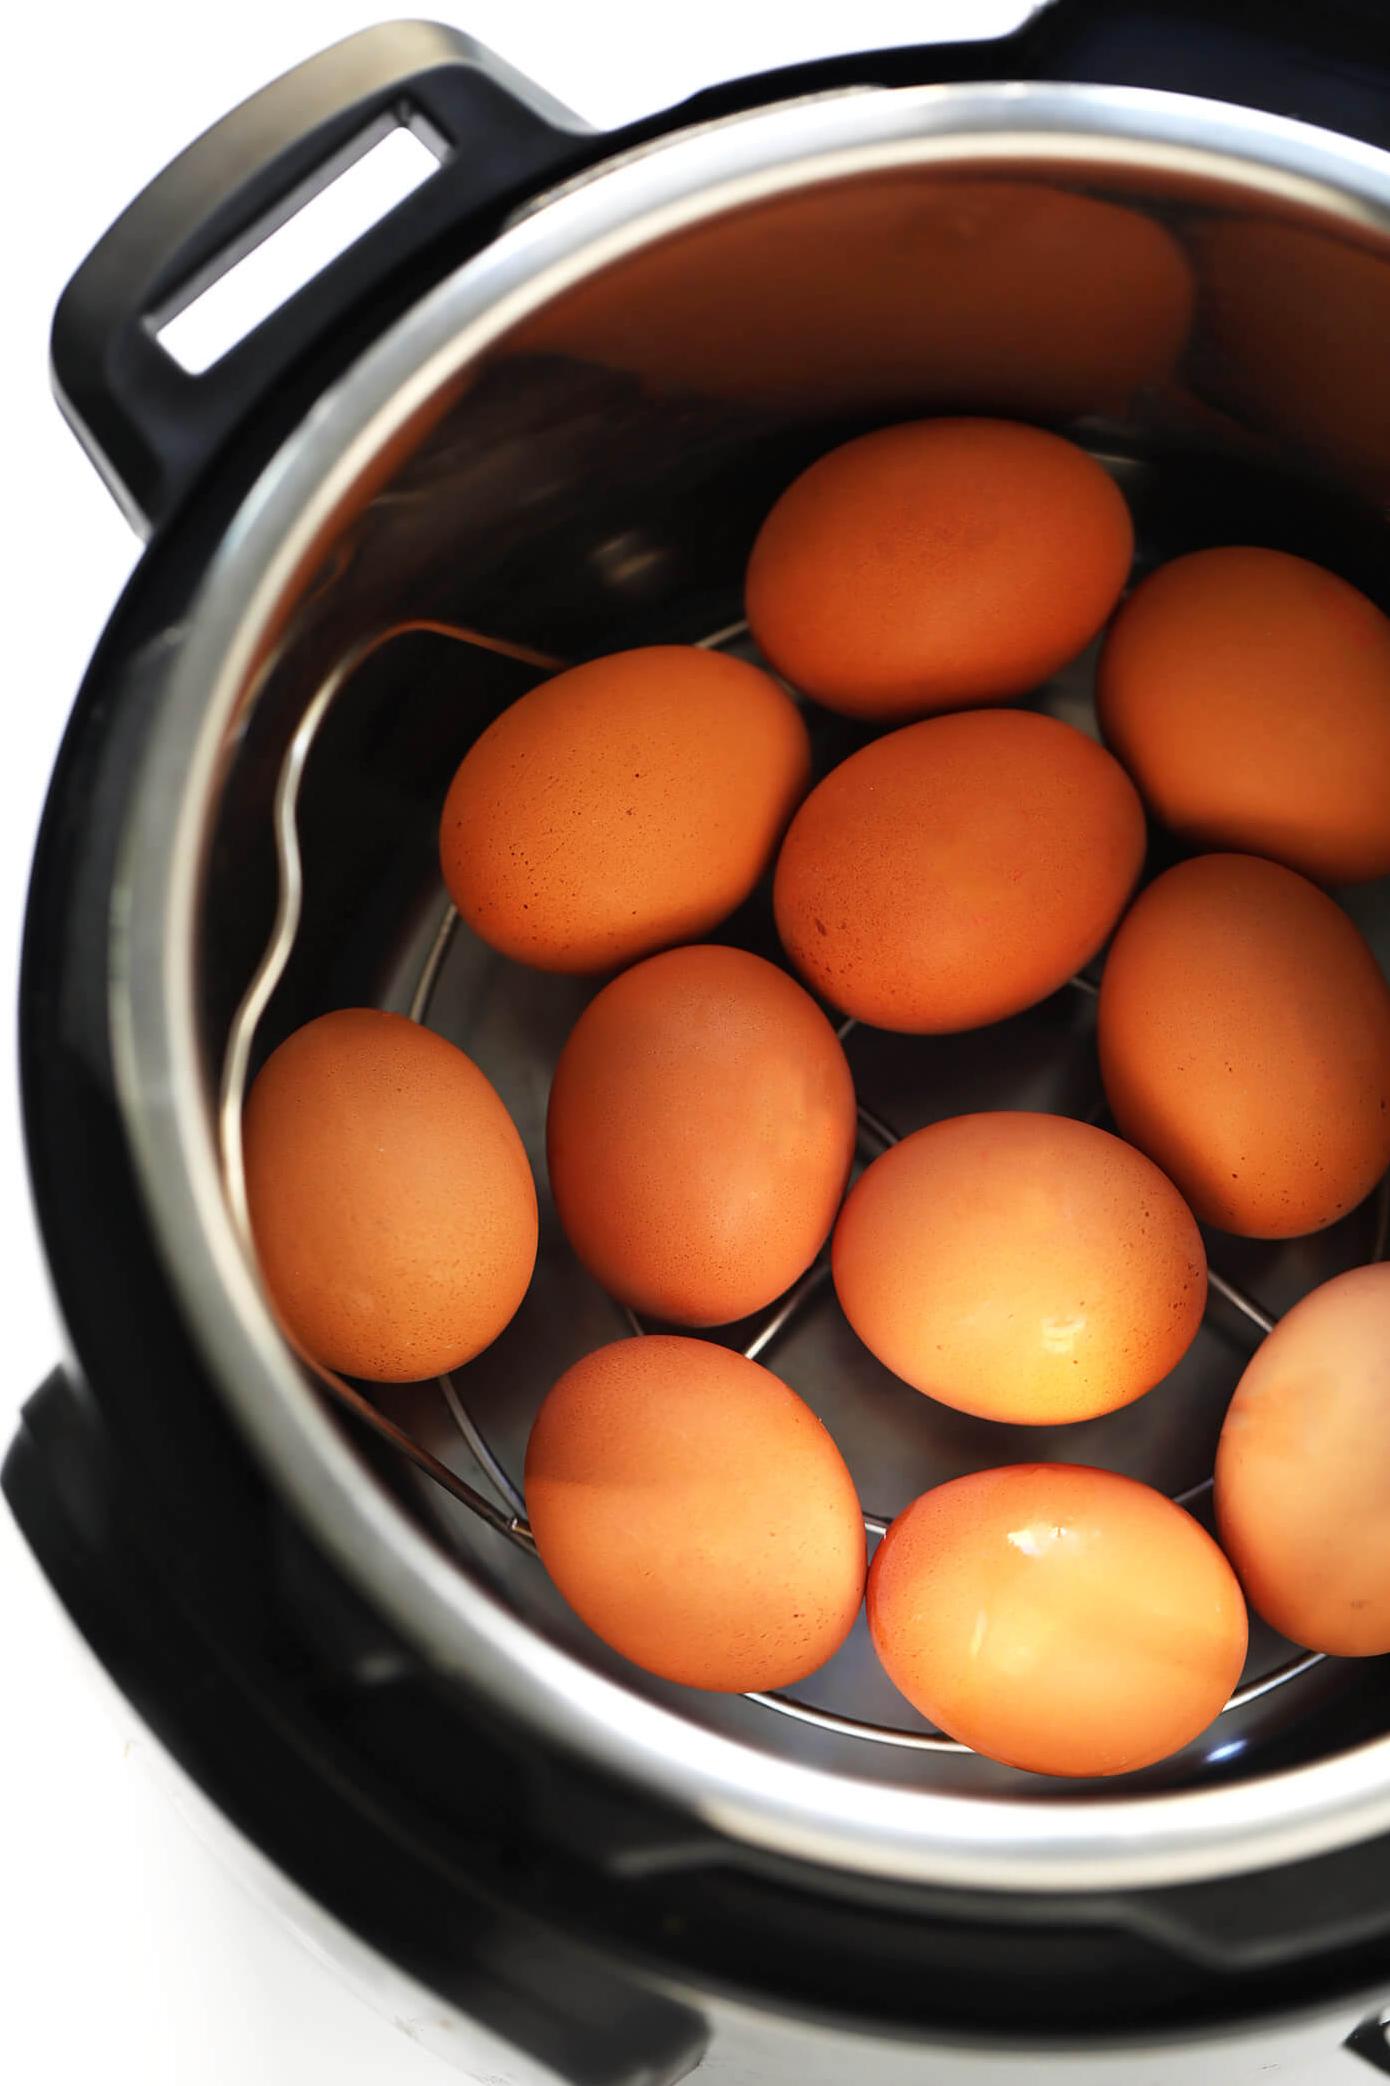  These eggs are cooked to perfection in no time with the Instant Pot